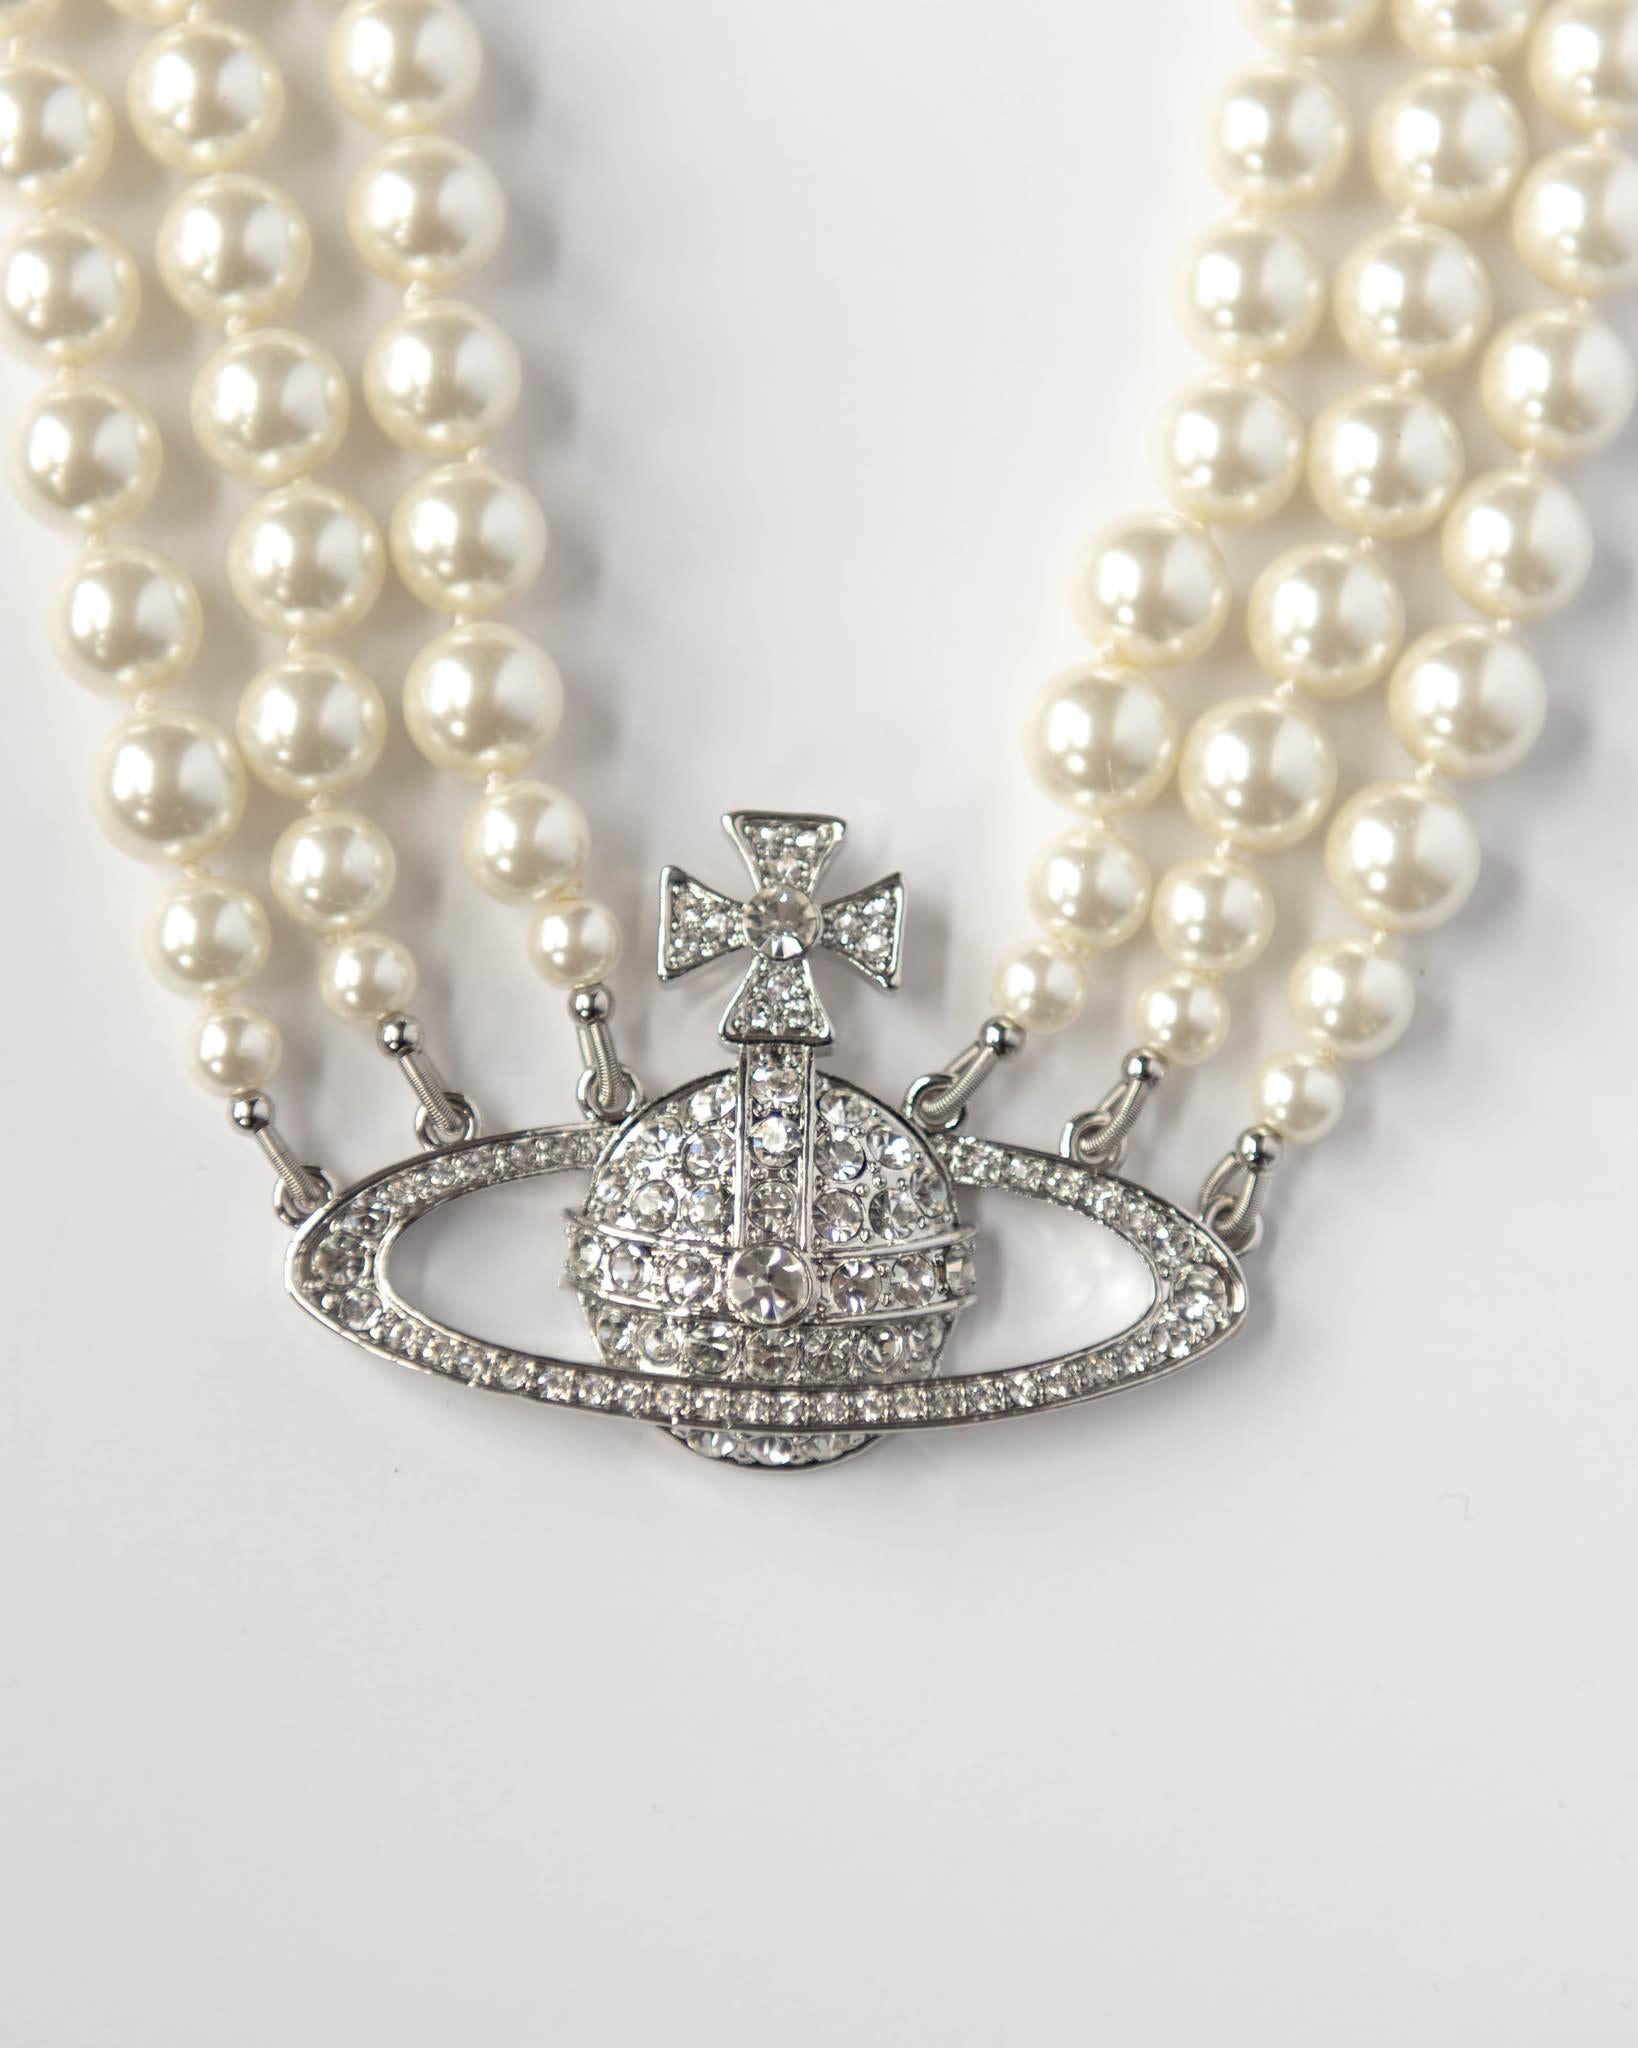 The iconic Vivienne Westwood pearl collection from decades ago is revisited. The sliver-tone three row pearl choker is hard knotted with rows of Swarovski pearls and set with the encrusted Orb at the centre. It’s deigned to hug the neck in true